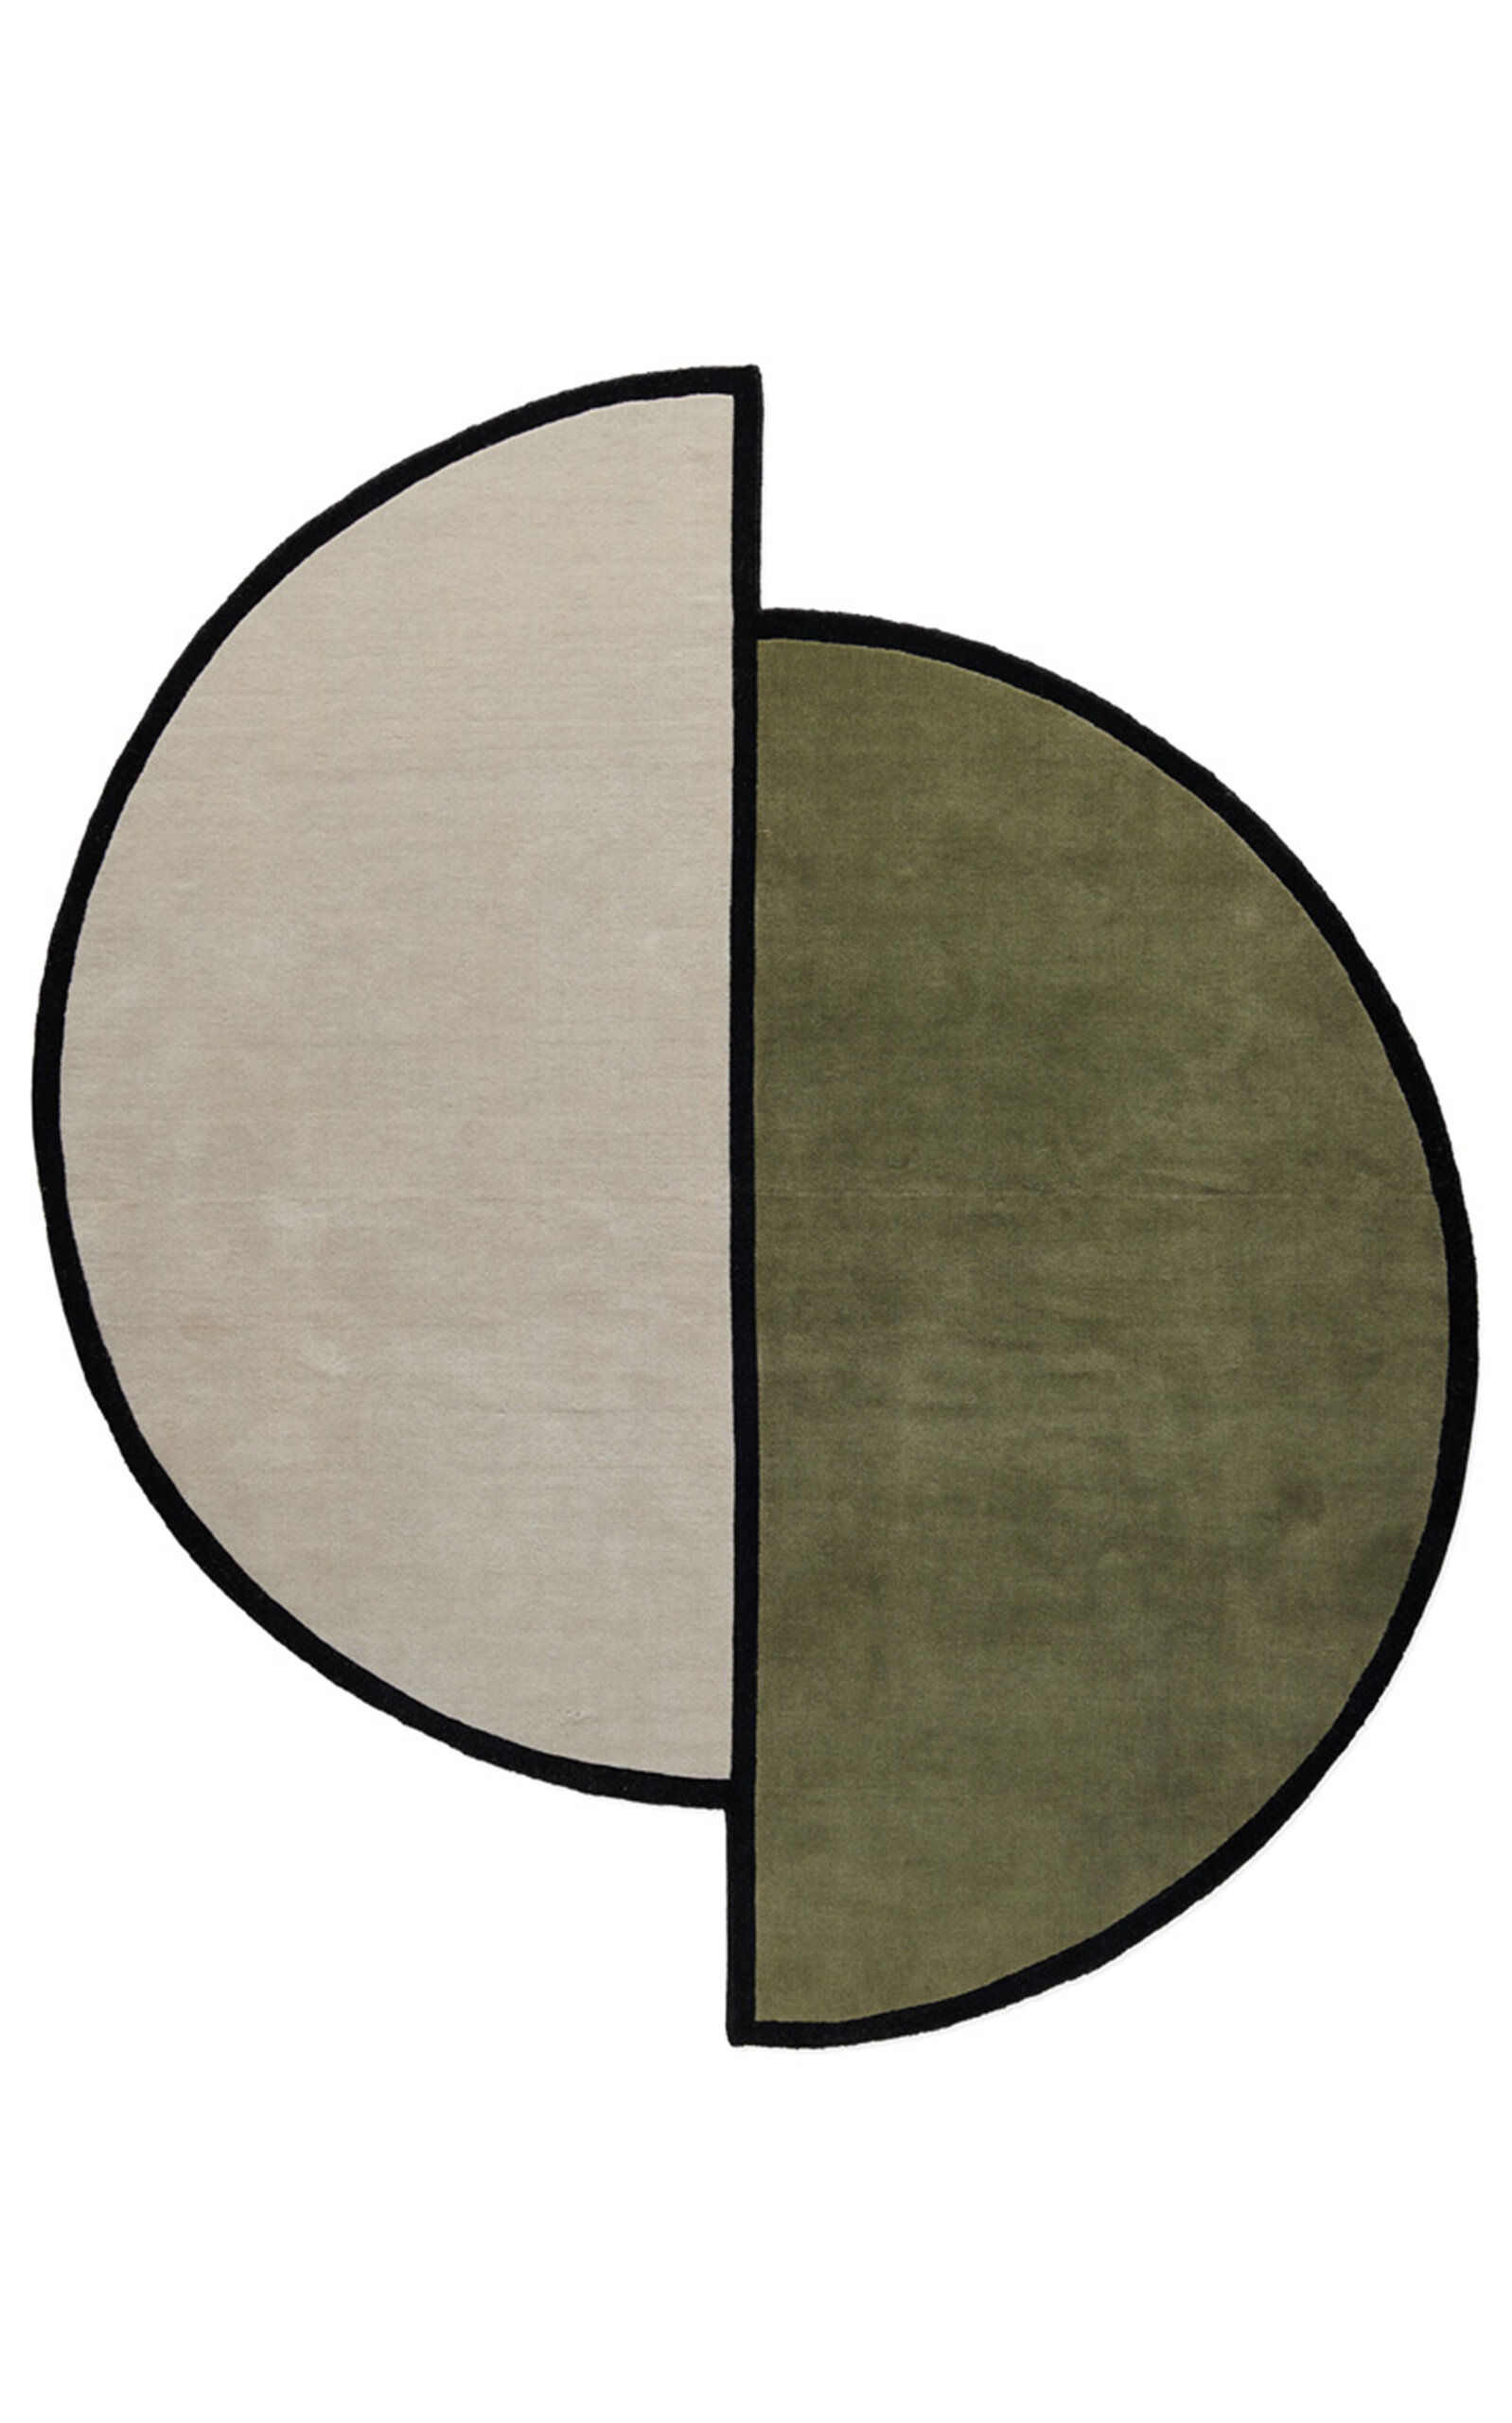 Nordic Knots Norr Mälarstrand 02 By ; Hand Loomed Area Rug In Oatmeal/green; Size 6' X 9' In Neutral